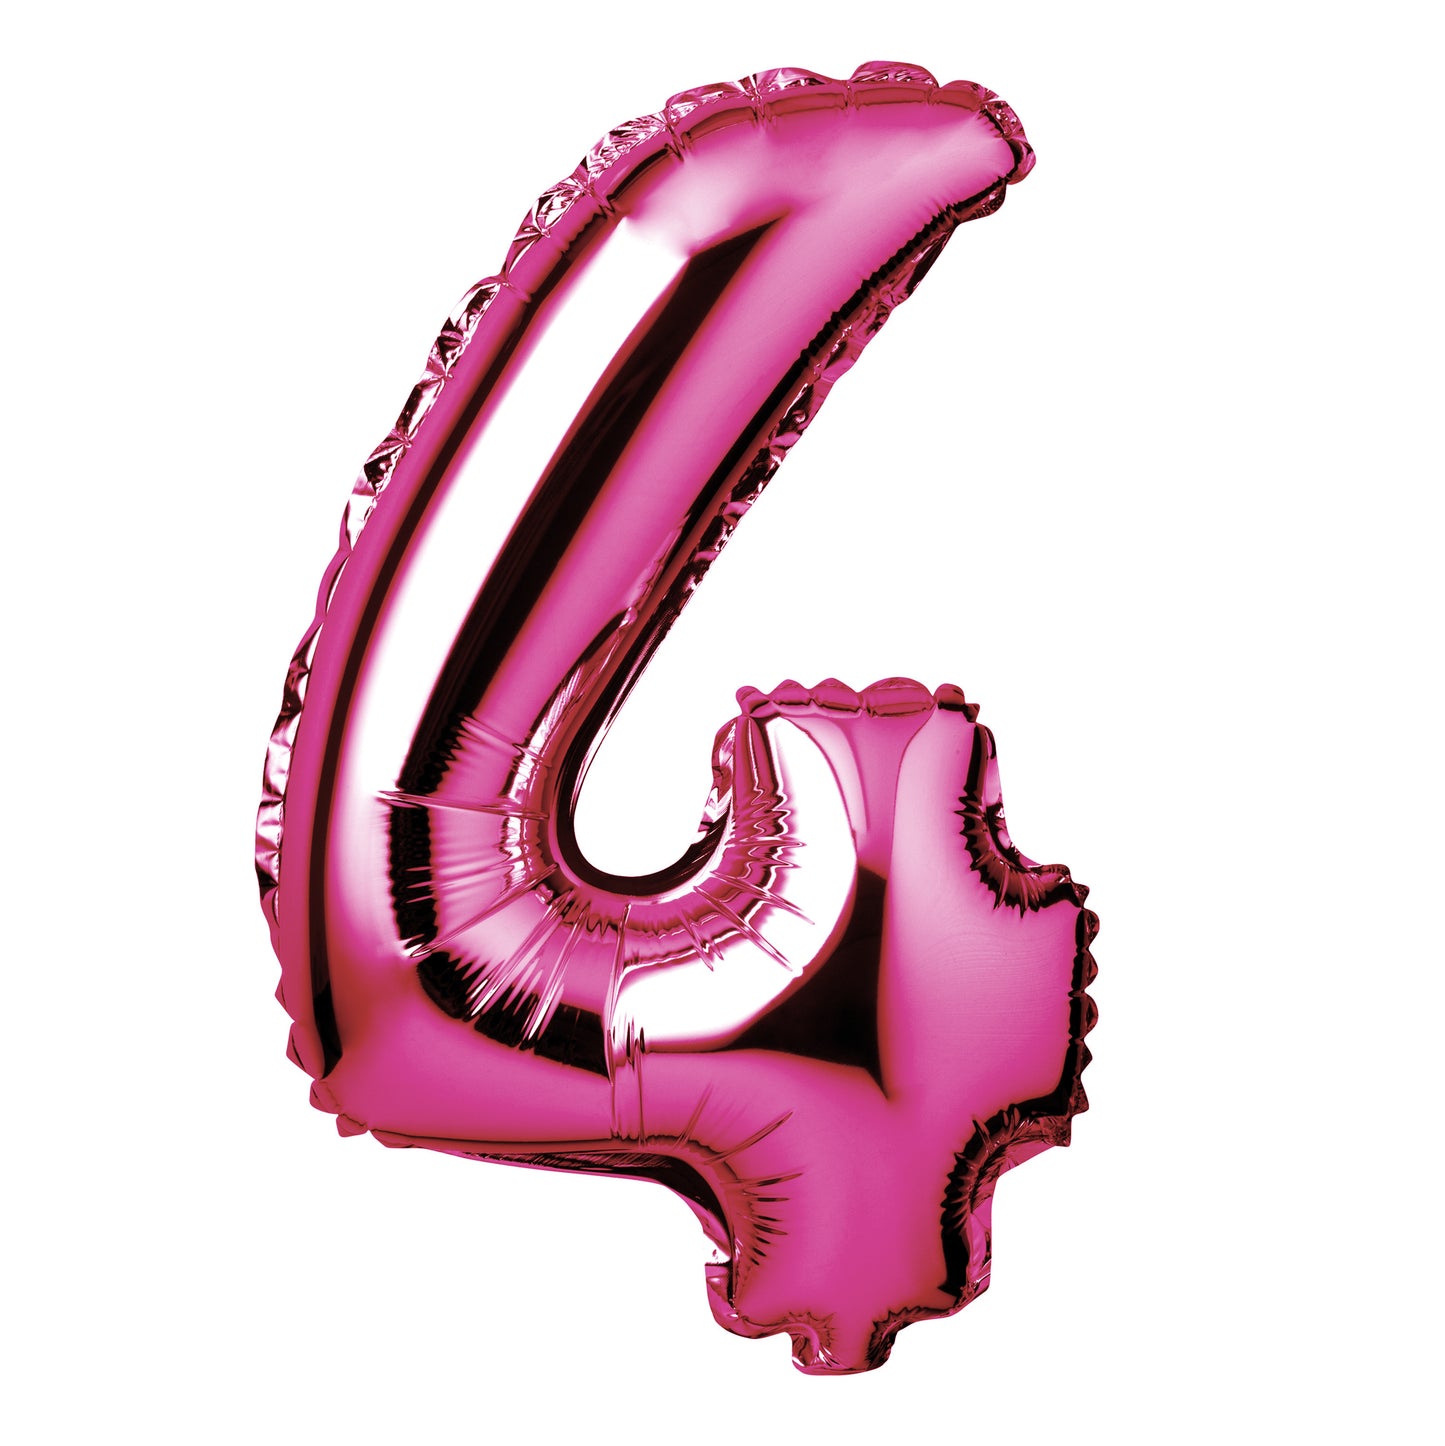 34" Giant Foil Hot Pink Number 4 Balloon